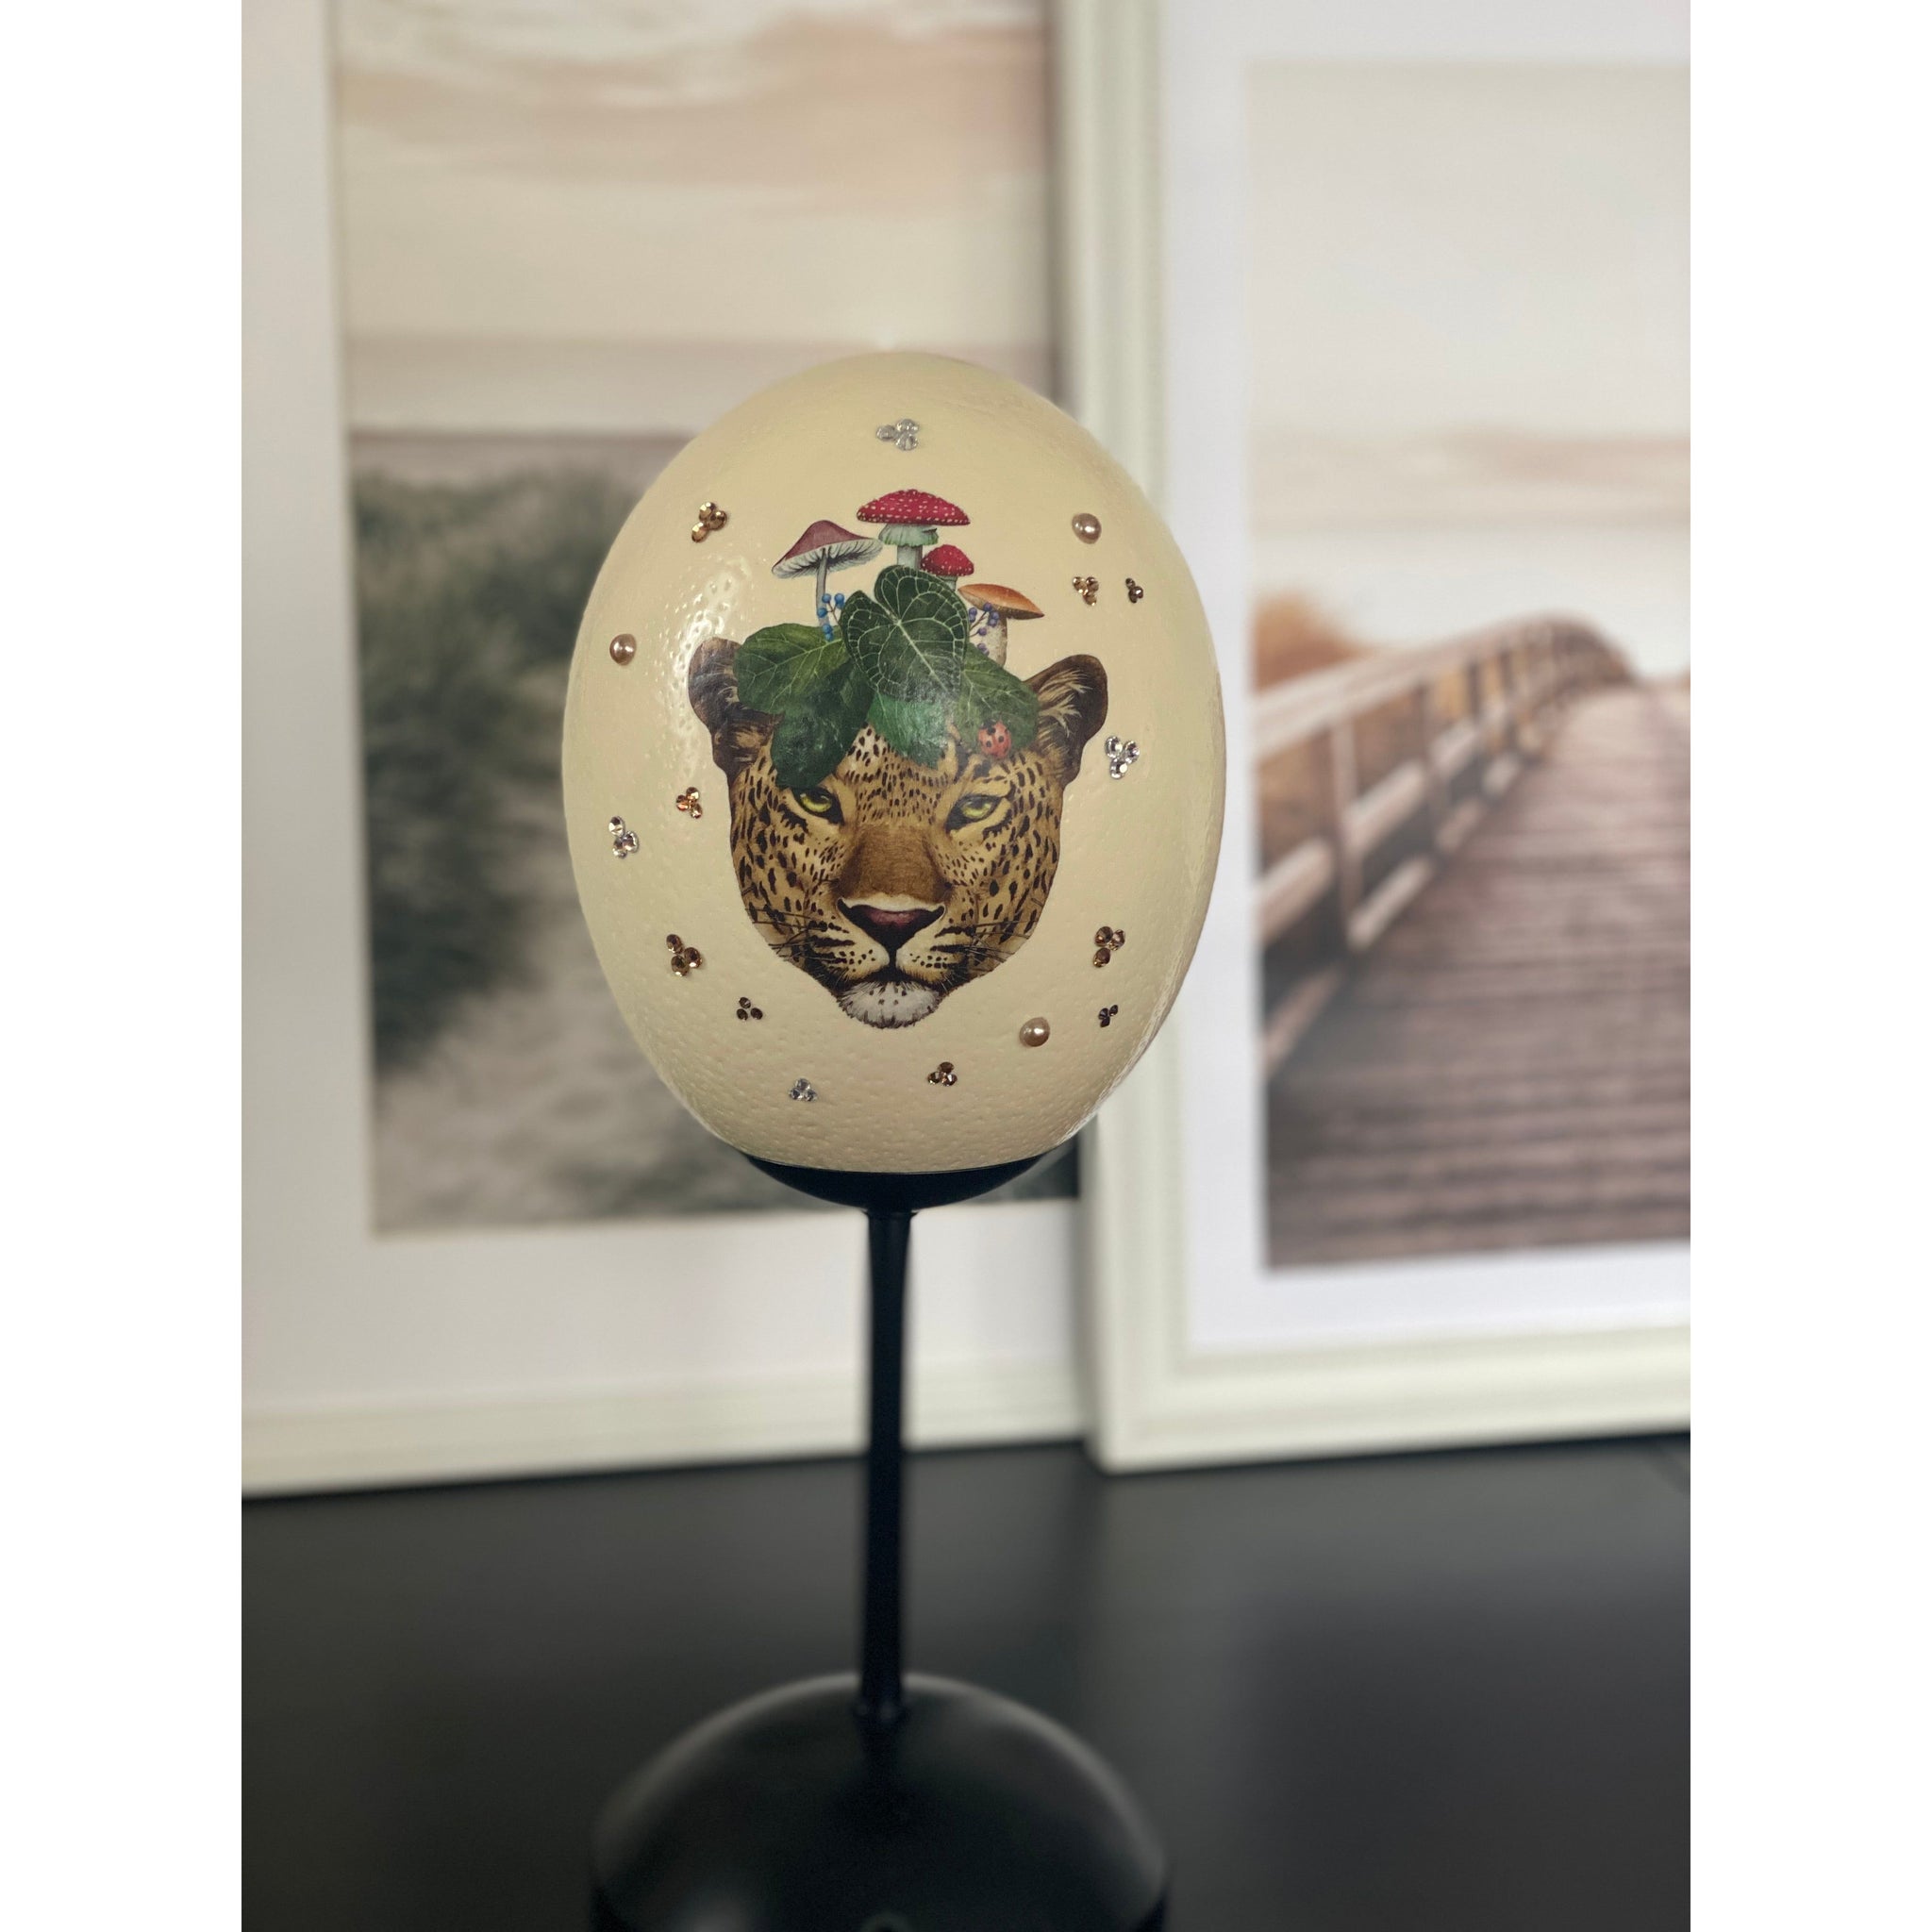 Ostrich egg lamp, leopard with mushroom hat